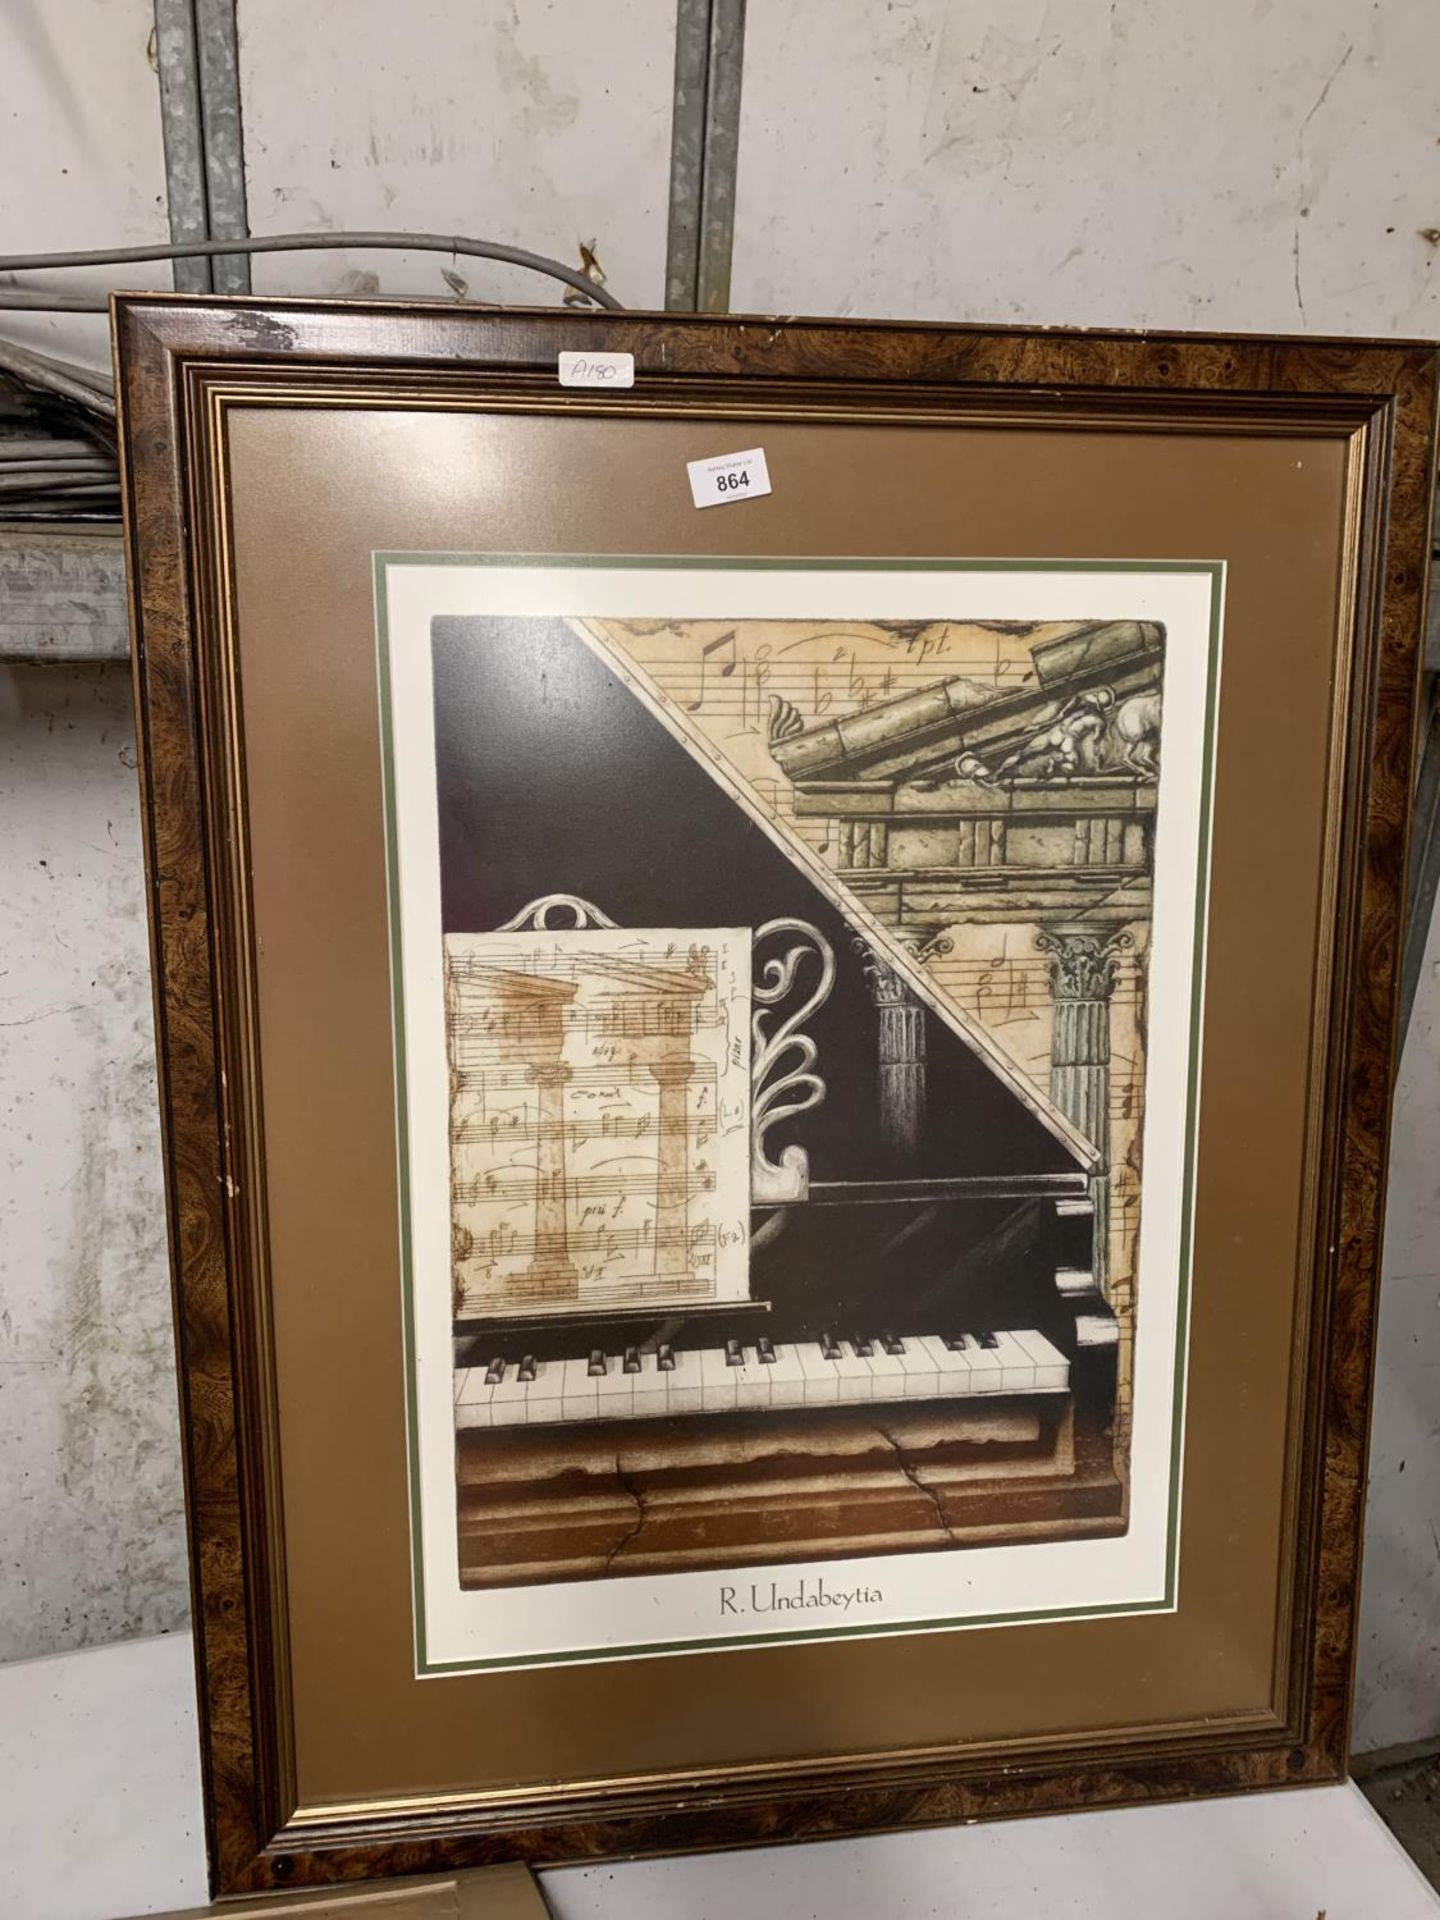 TWO WOODEN FRAMED, MUSIC THEMED, 'R. UNDABEYTIA' PRINTS - Image 3 of 3